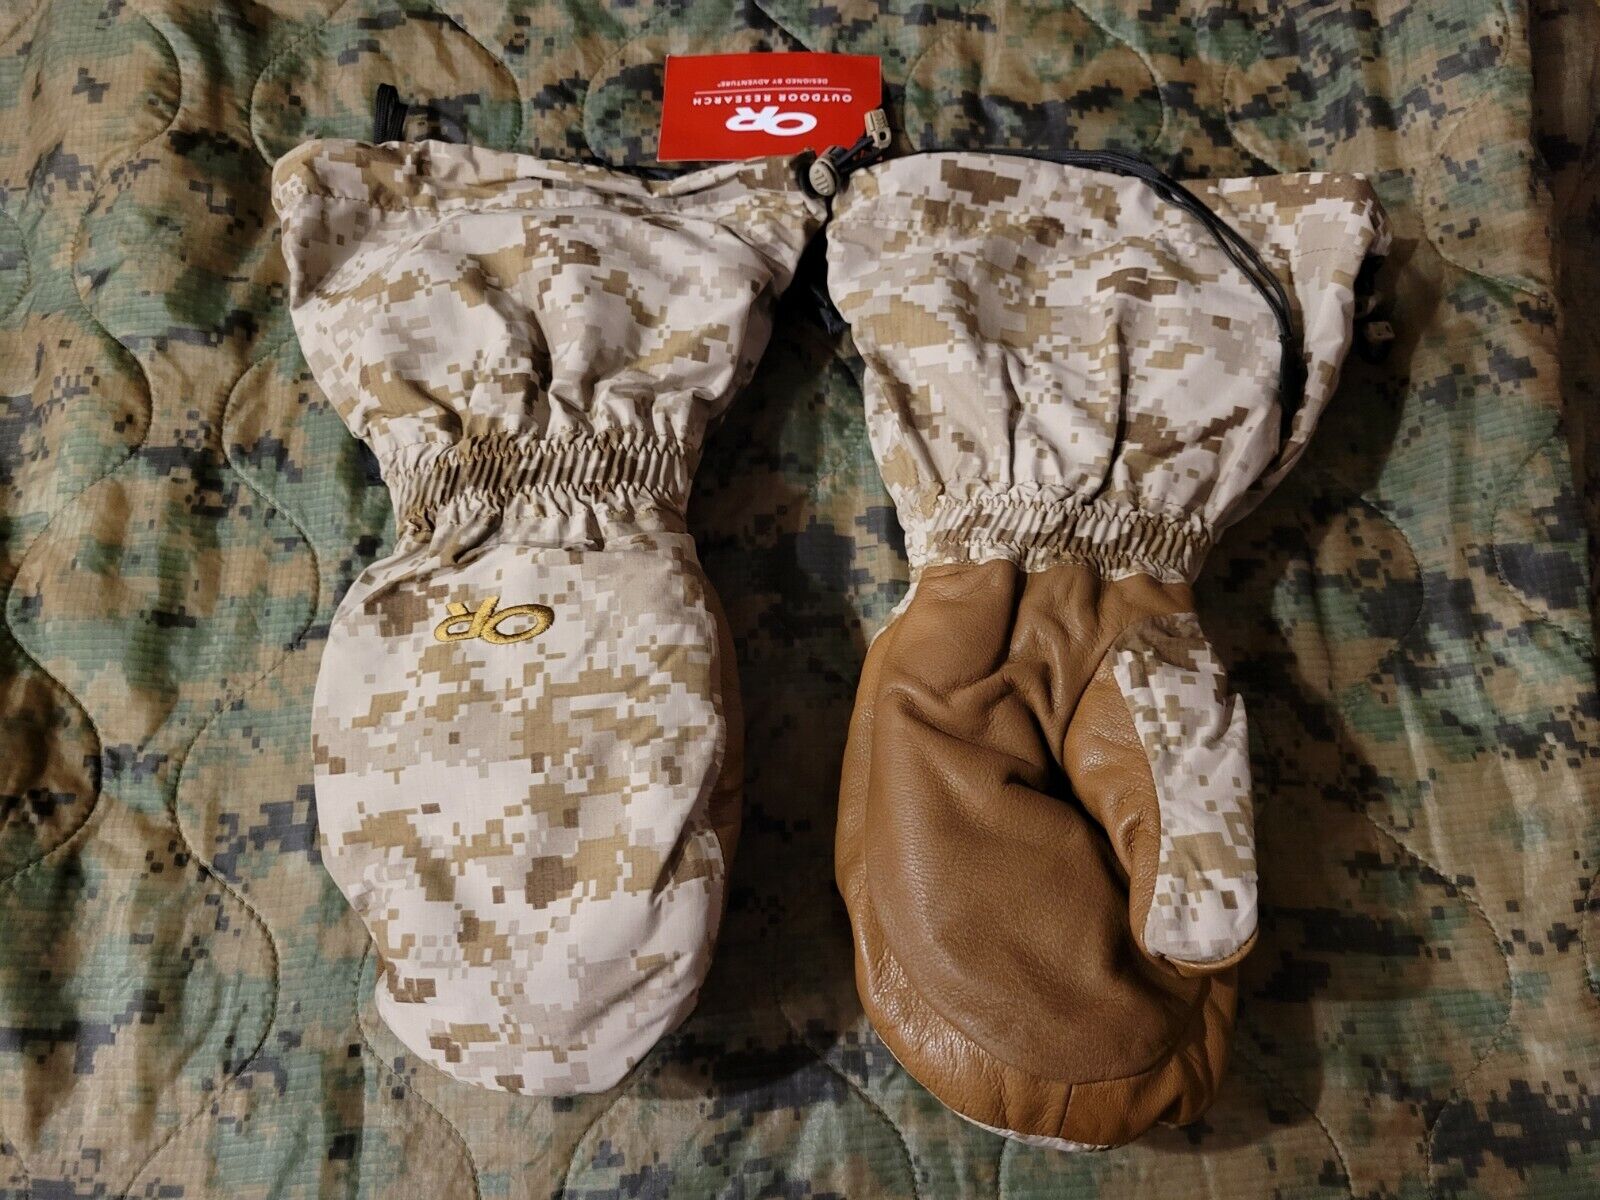 NEW WITH TAGS LARGE OUTDOOR RESEARCH AOR1 FIREBRAND MITTENS WITH LINERS.